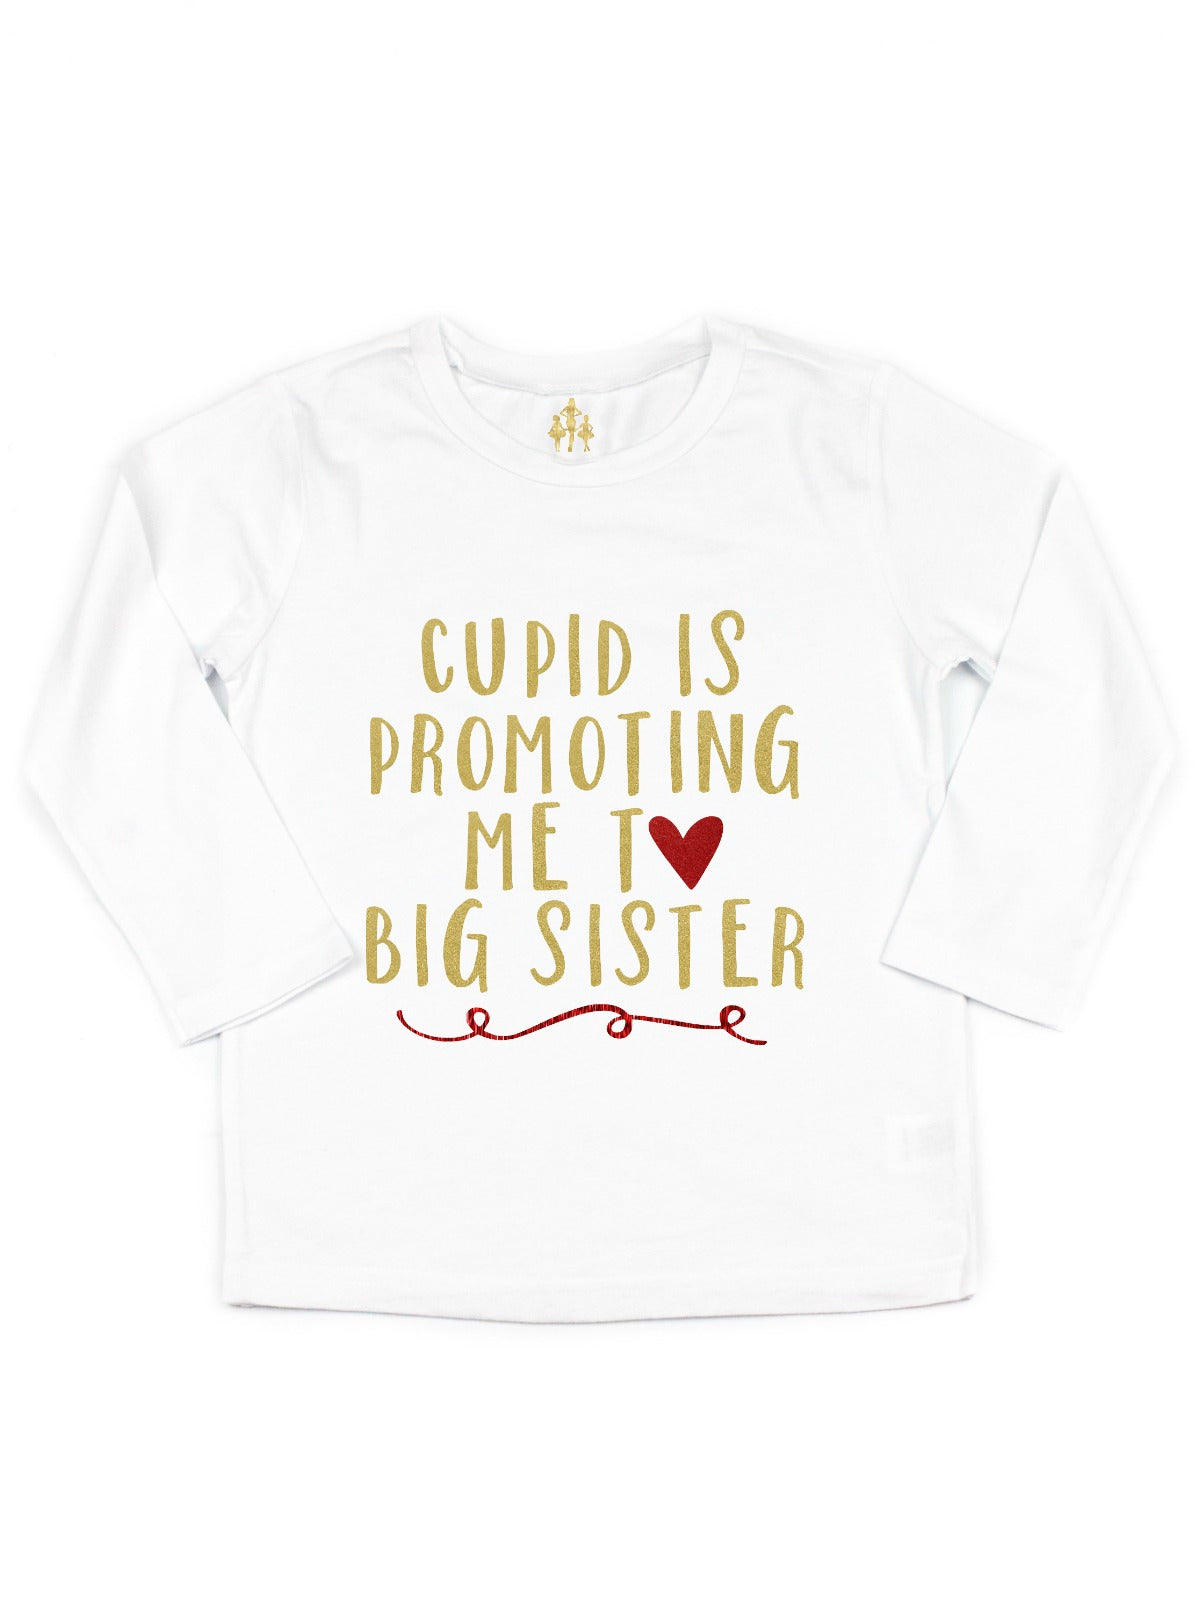 cupid is promoting me to big sister tutu outfit